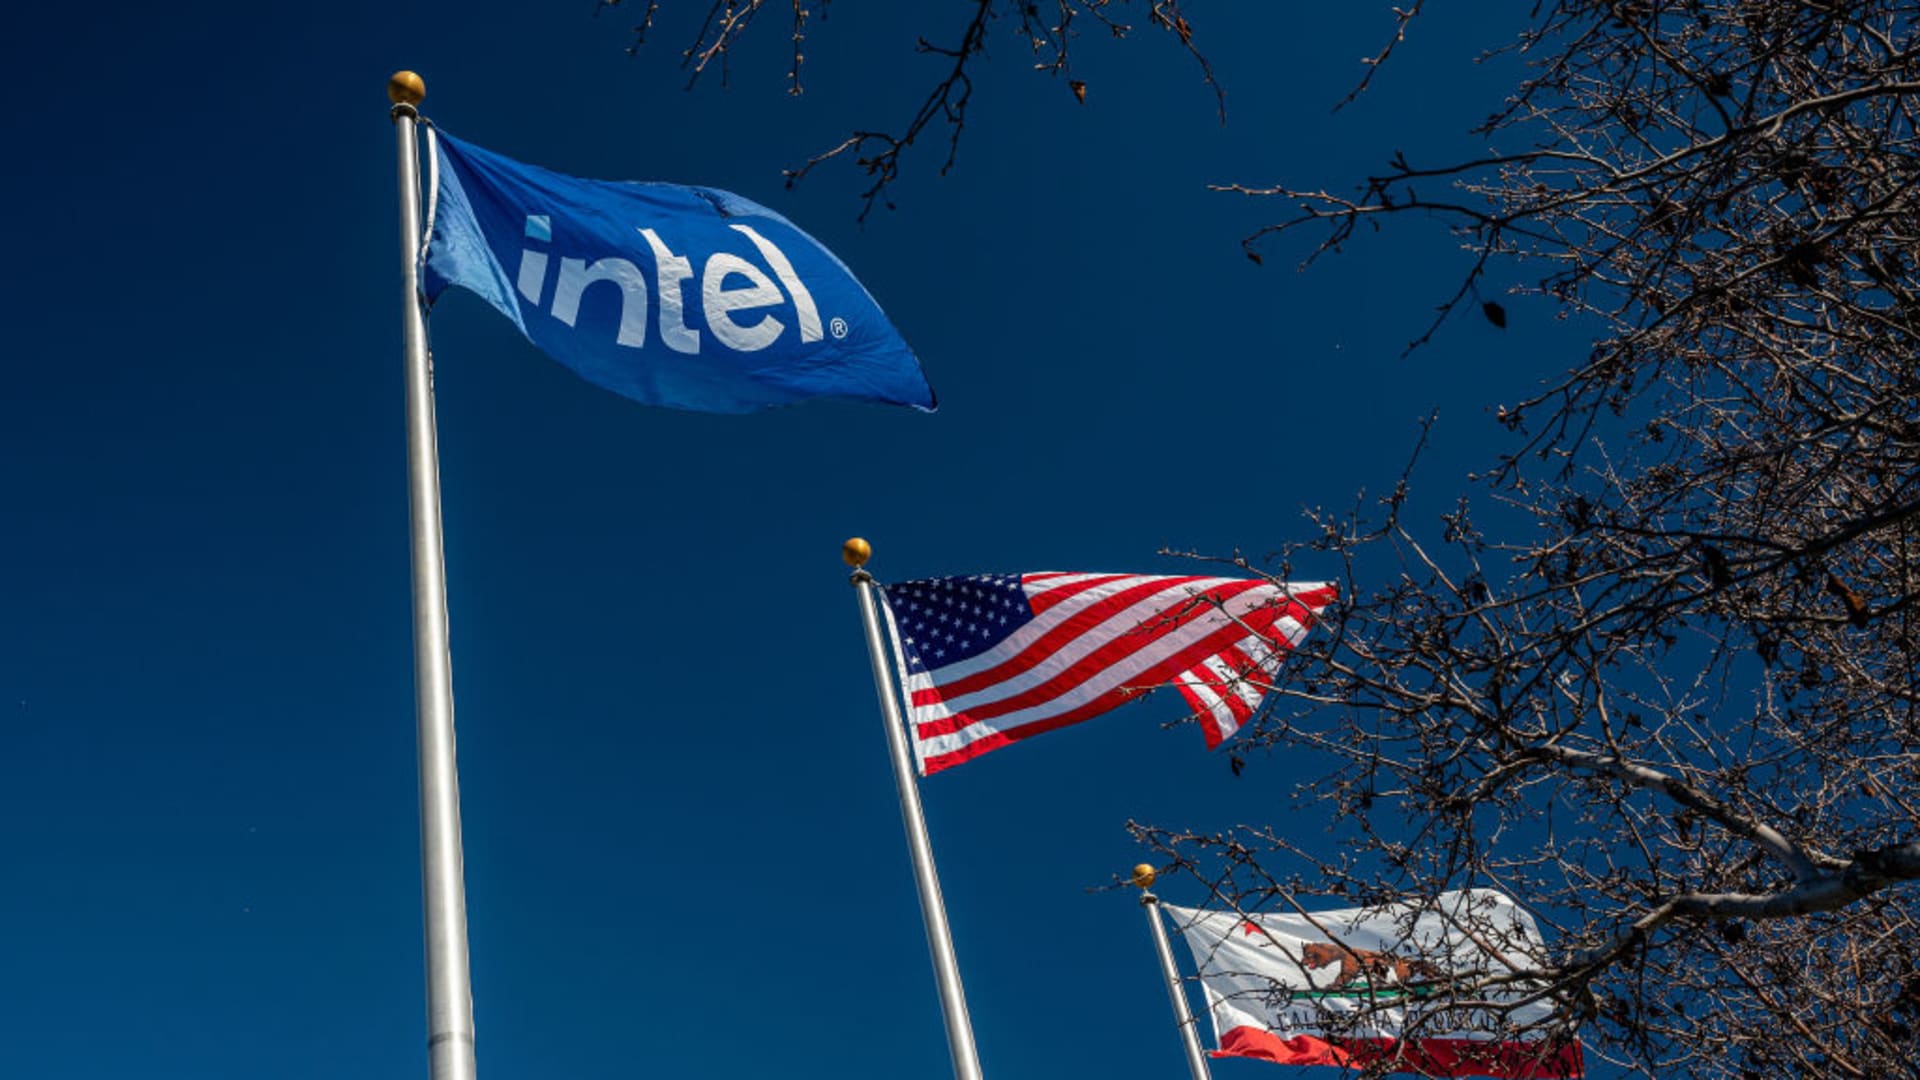 Intel stock rises on earnings beat and strong revenue guidance